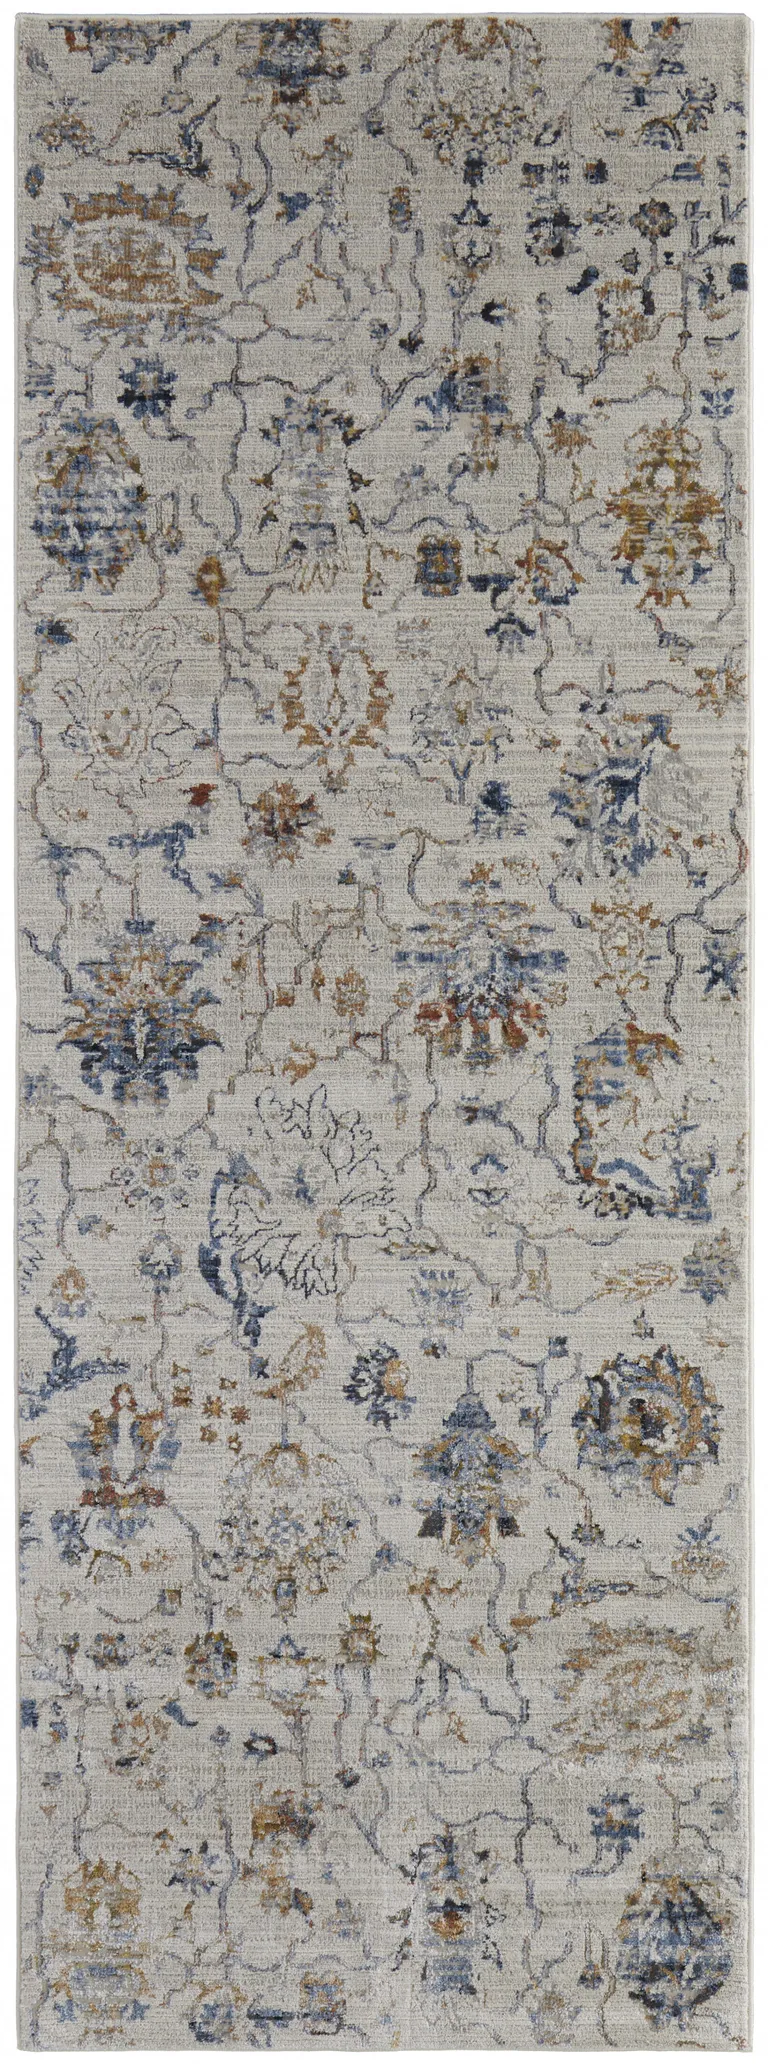 12' Ivory Orange And Blue Floral Power Loom Distressed Runner Rug With Fringe Photo 5